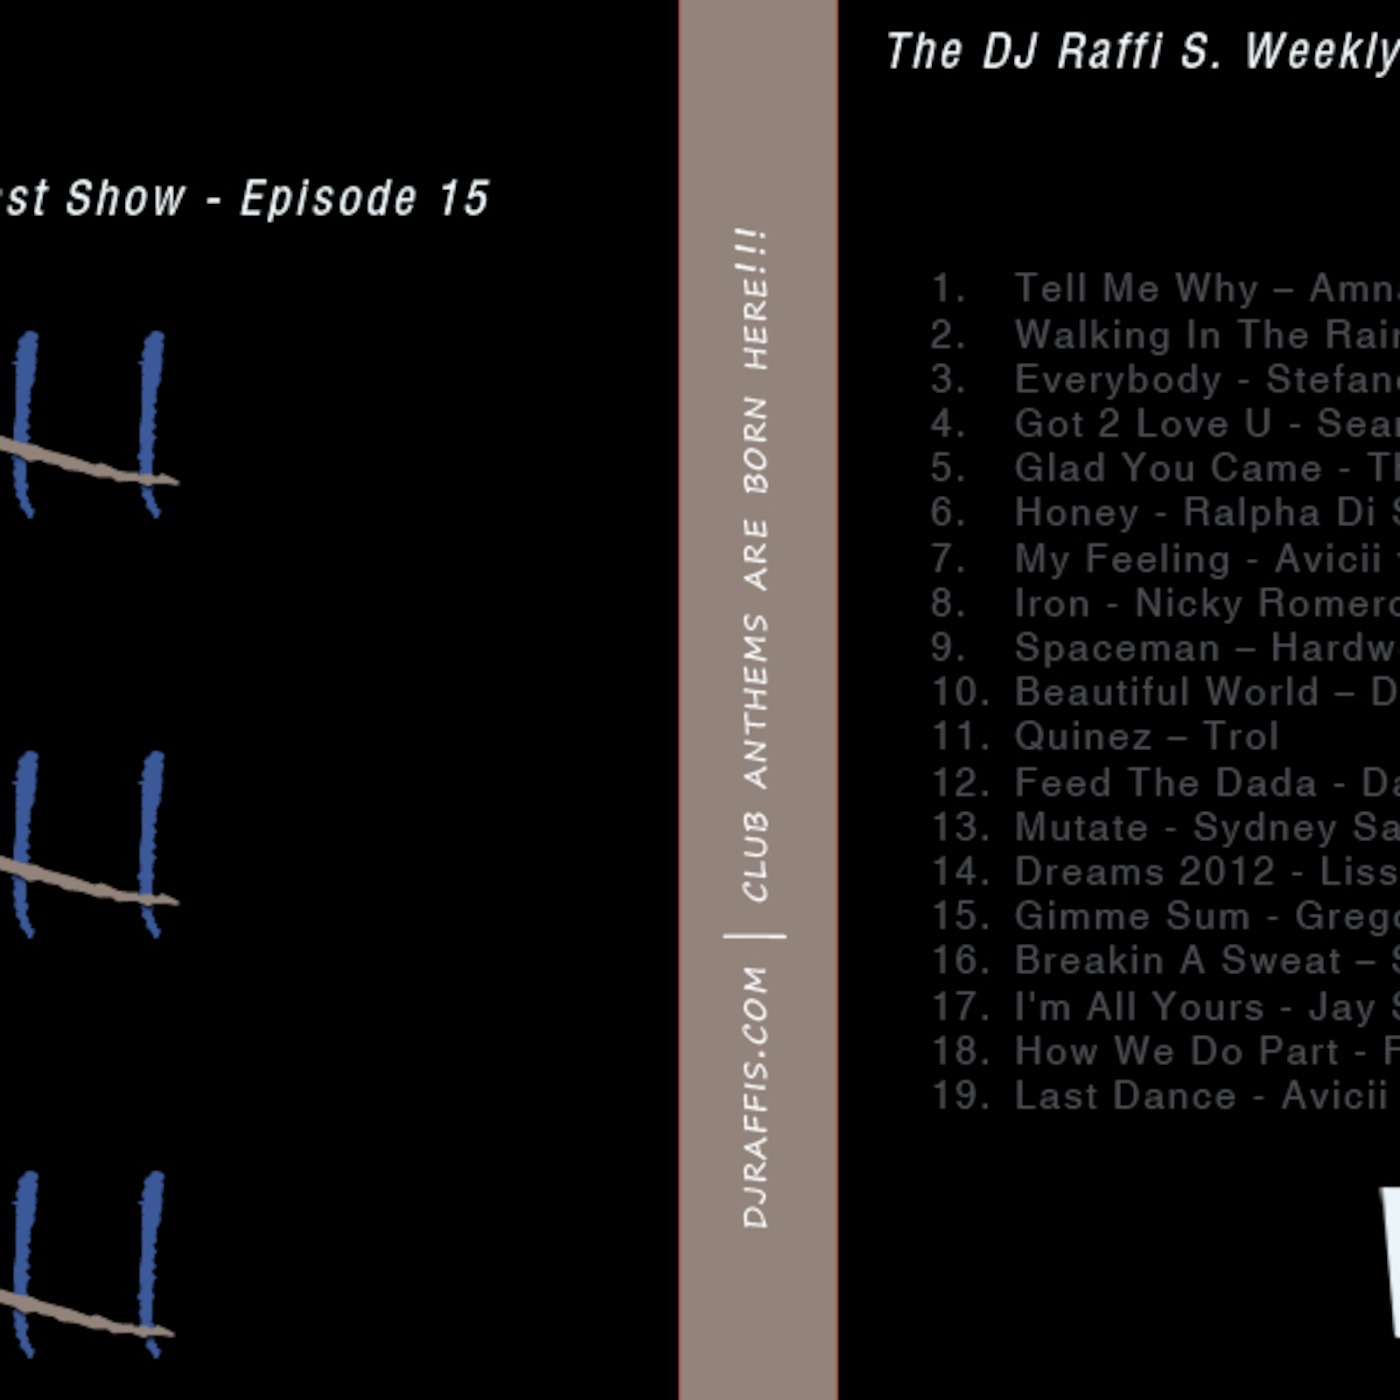 The DJ Raffi S. Weekly Podcast Show - Episode 15